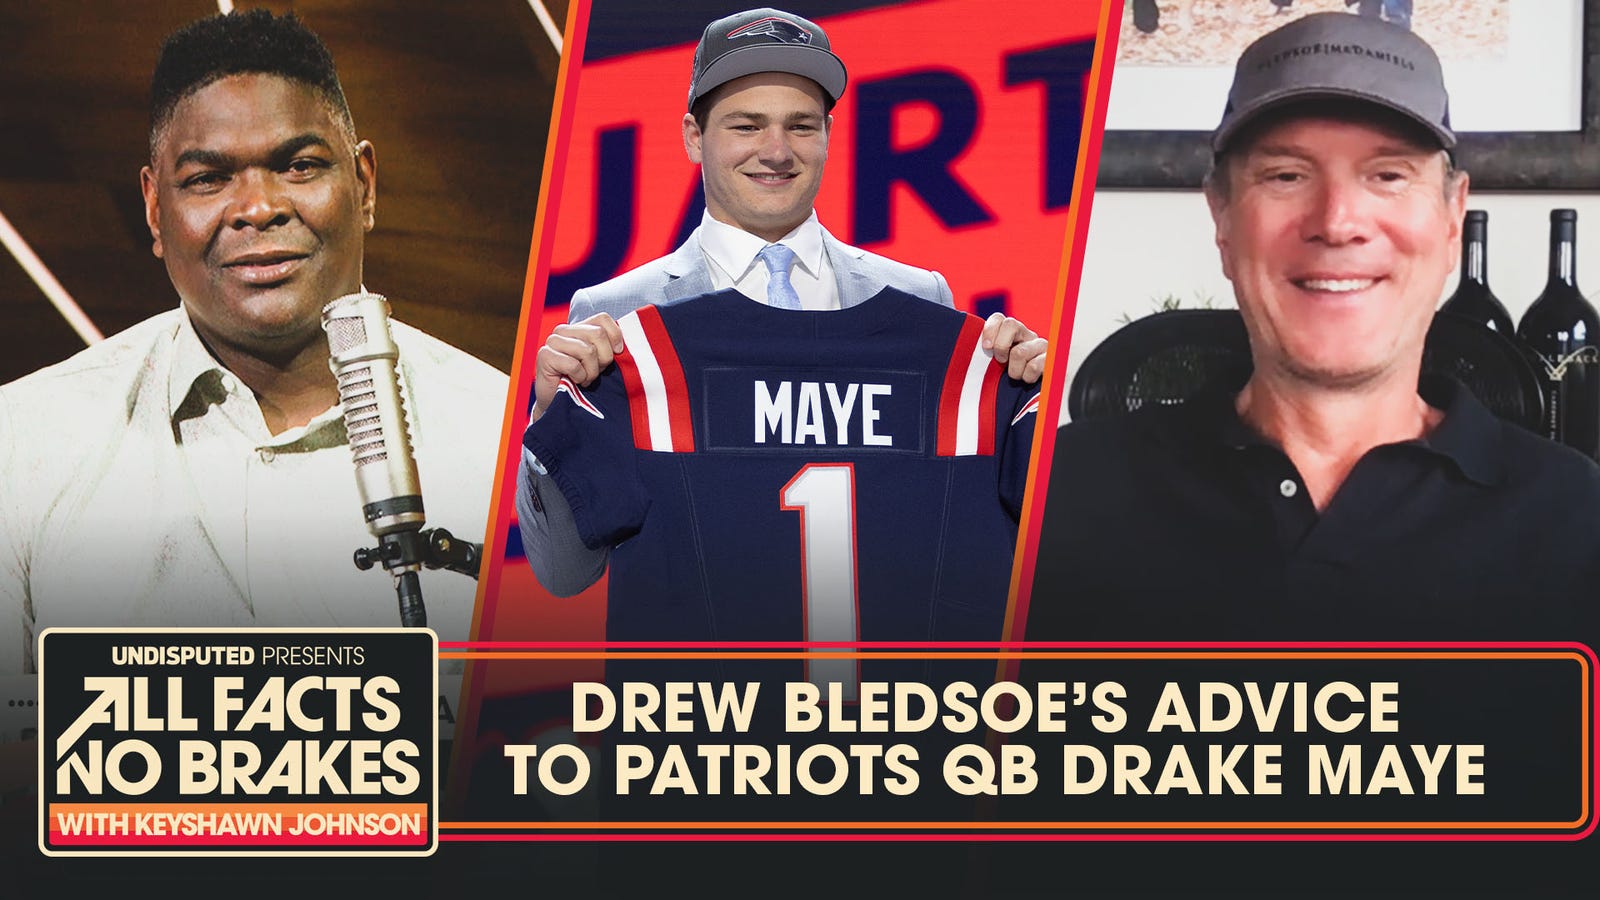 Drew Bledsoe's advice to Patriots rookie QB Drake Maye | All Facts No Brakes